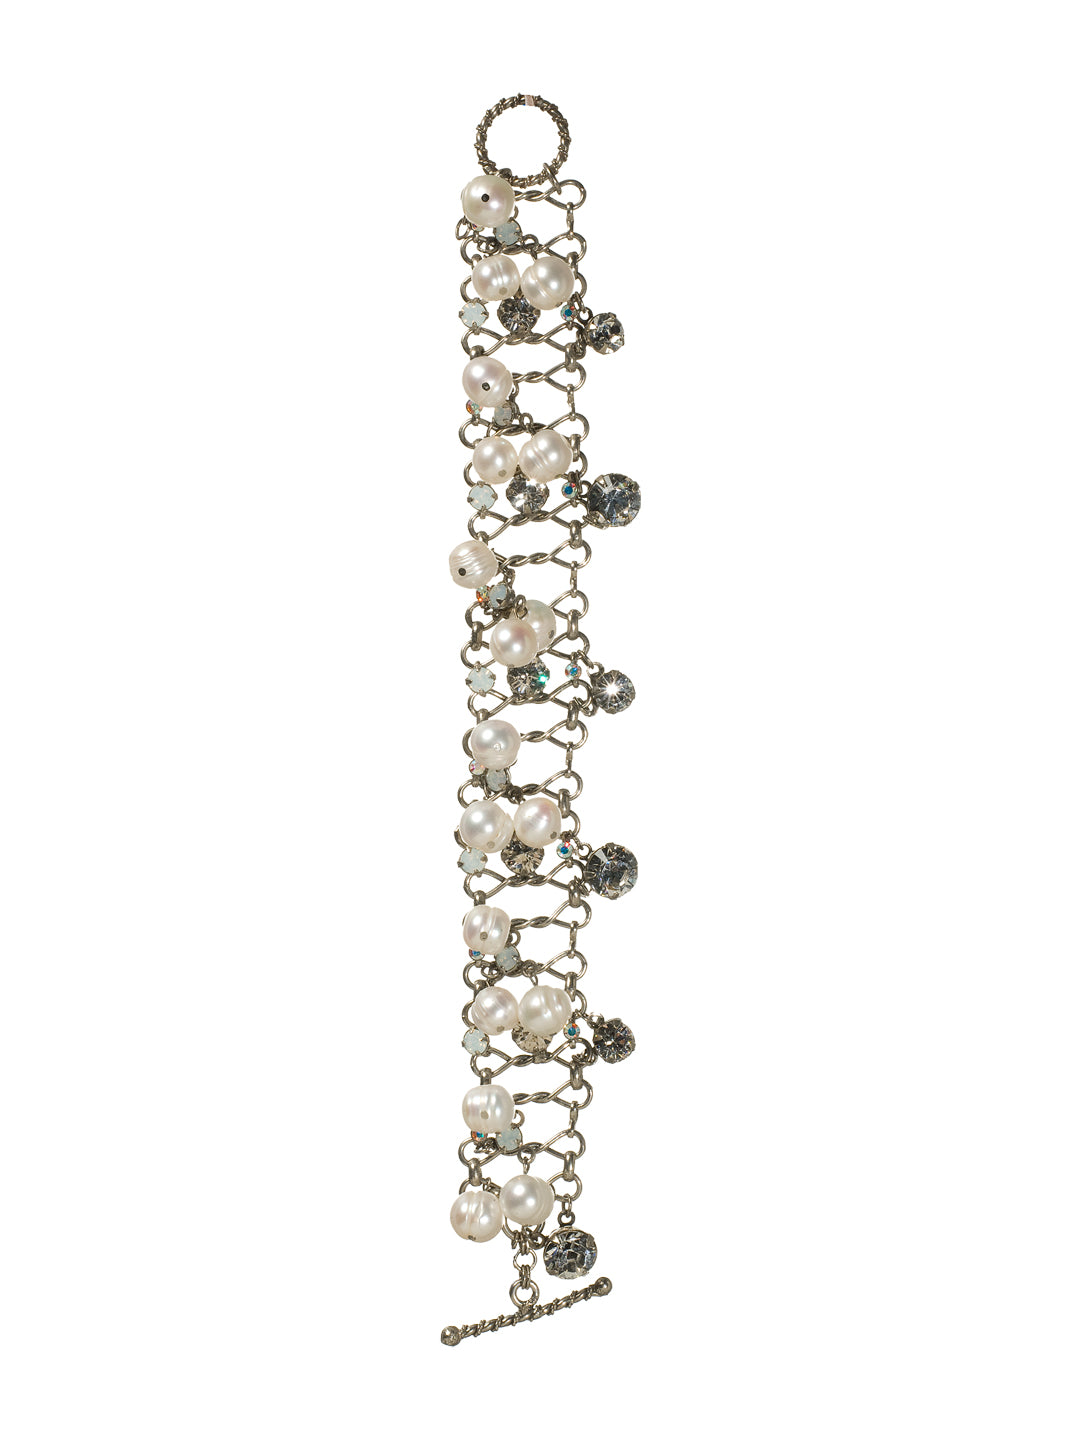 Clustered Crystal and Bead Layered Bracelet - BCF5ASWBR - This design spotlights pearls and round crystals on a decorative chain for perfect date night look. From Sorrelli's White Bridal collection in our Antique Silver-tone finish.